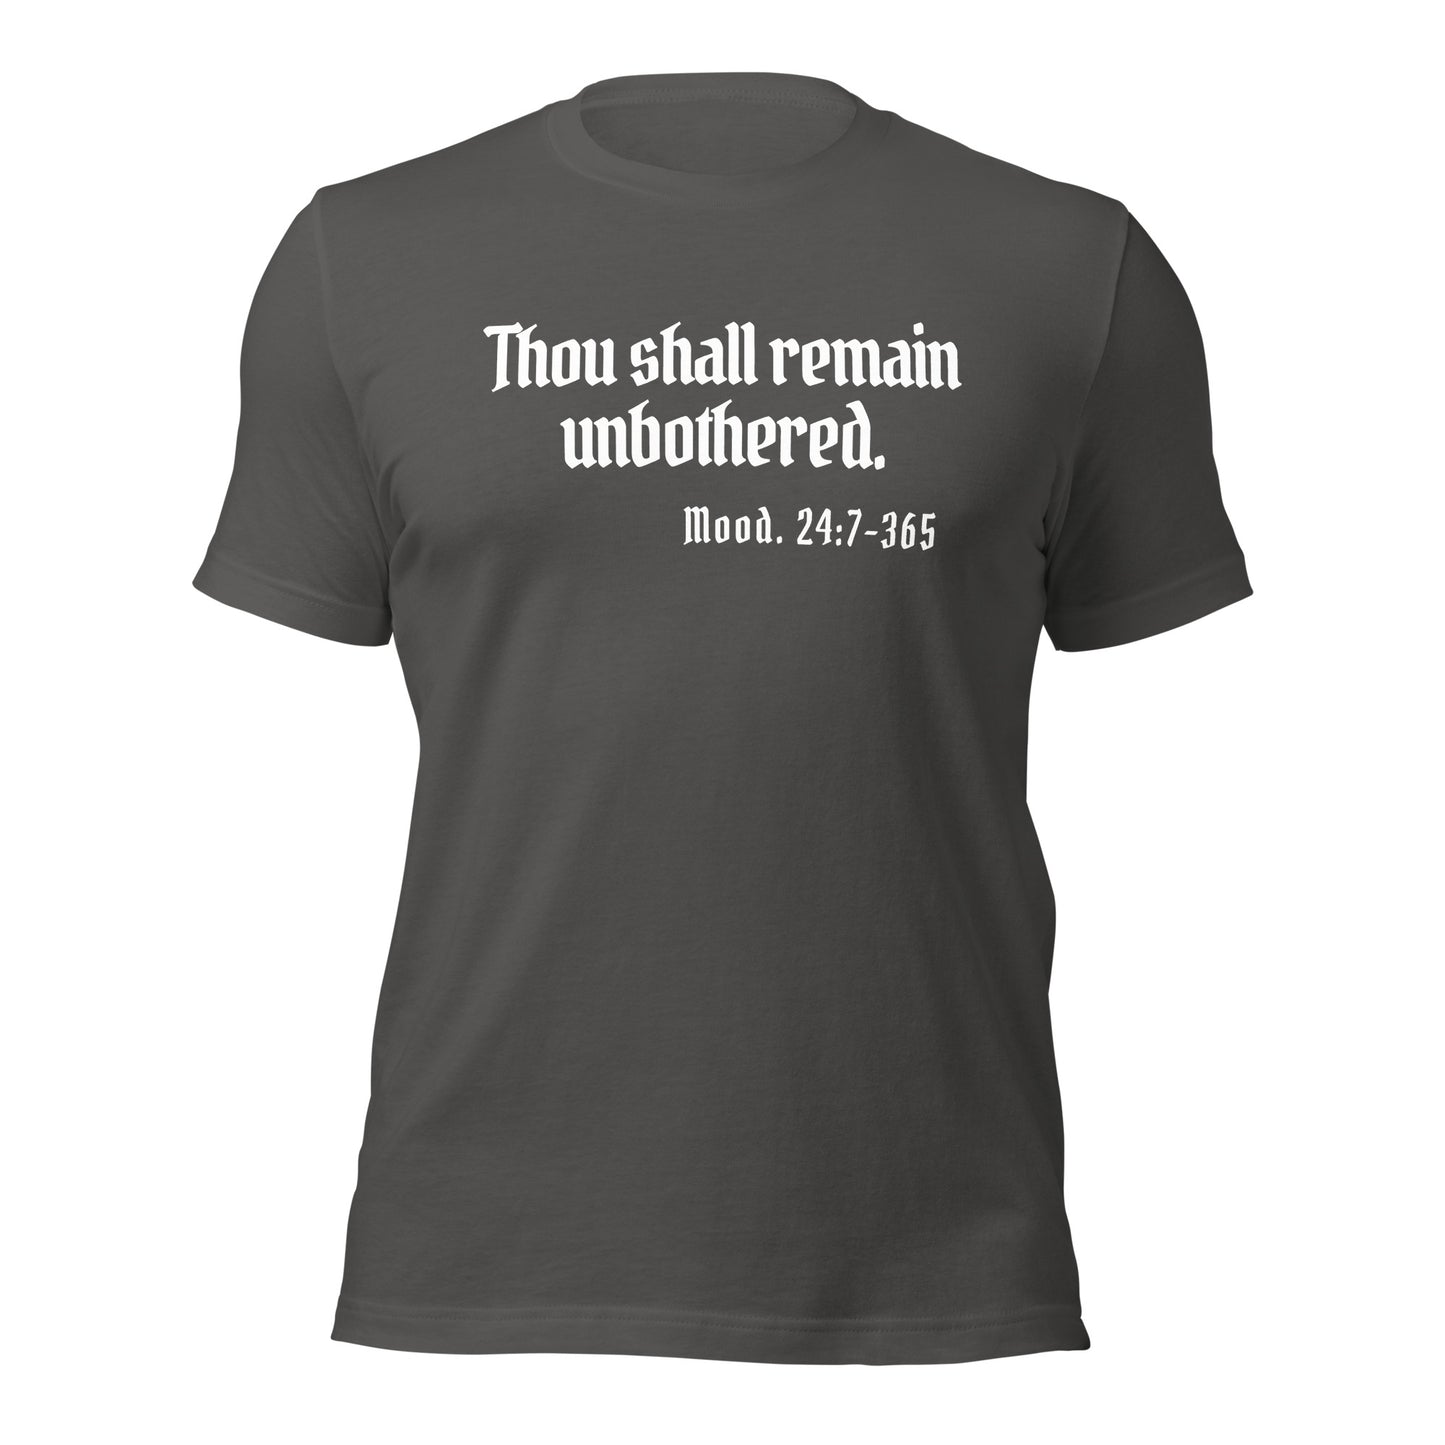 Unbothered T-shirt